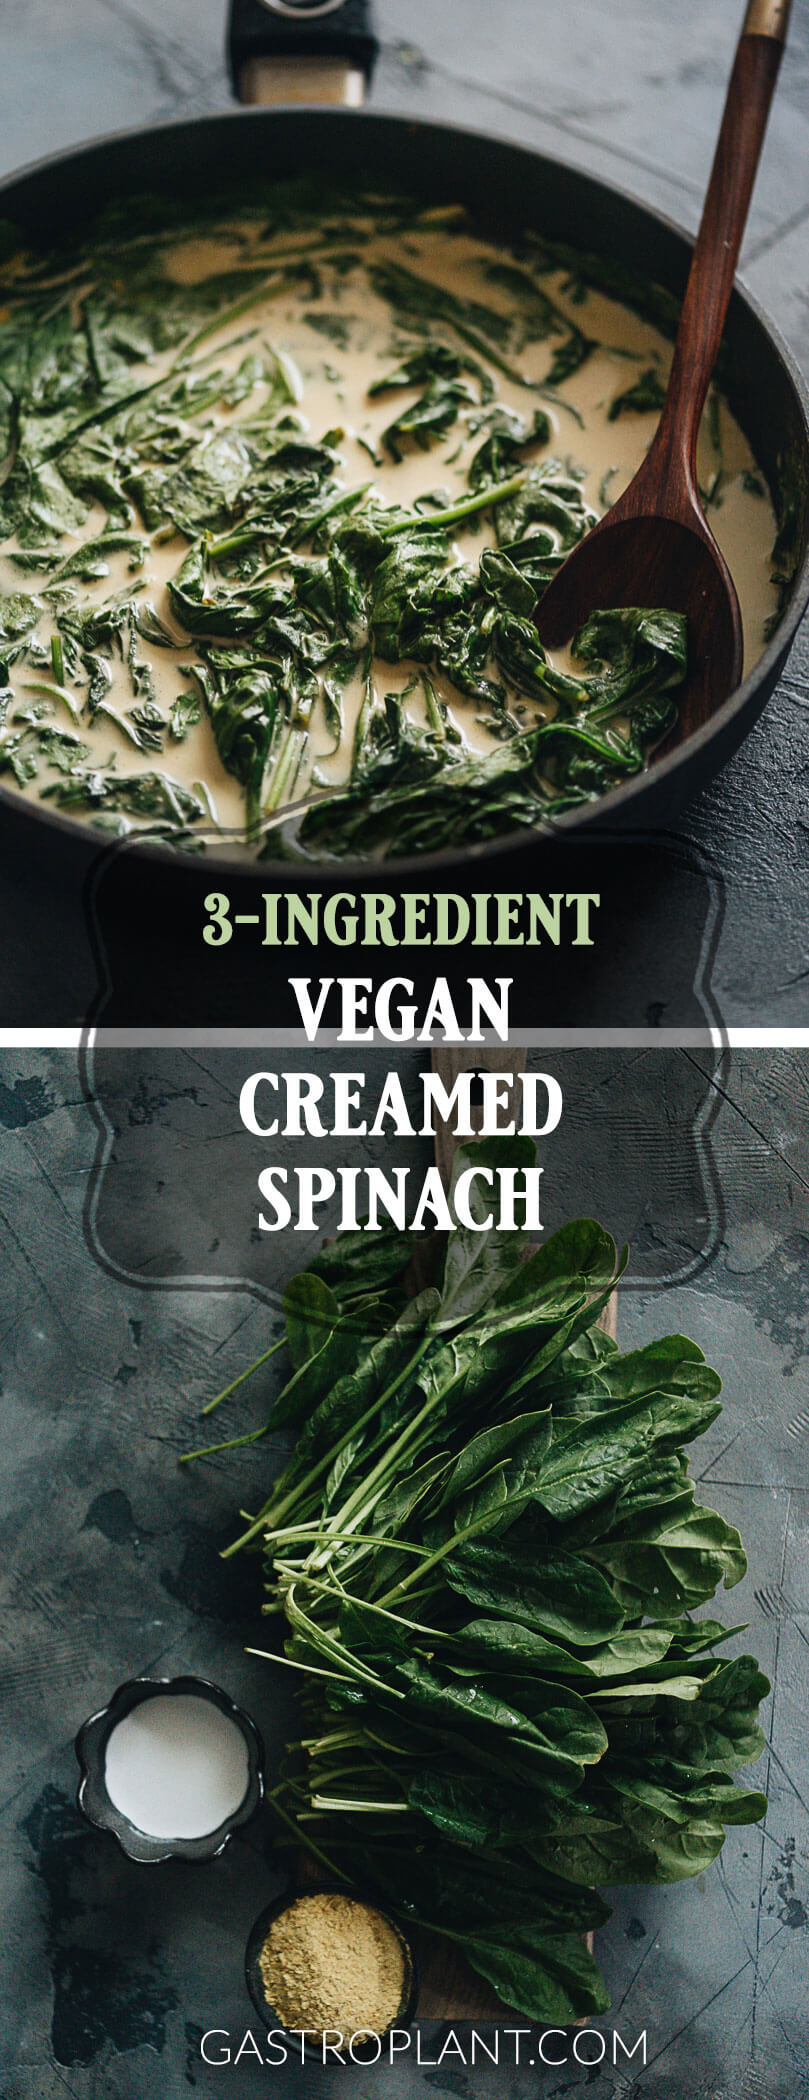 This 3-ingredient vegan creamed spinach recipe is every bit as simple as the name suggests. You just need fresh spinach, some coconut milk, and a bit of nutritional yeast. A seriously tasty side dish or meal prep component can be yours in 5 minutes of cooking.